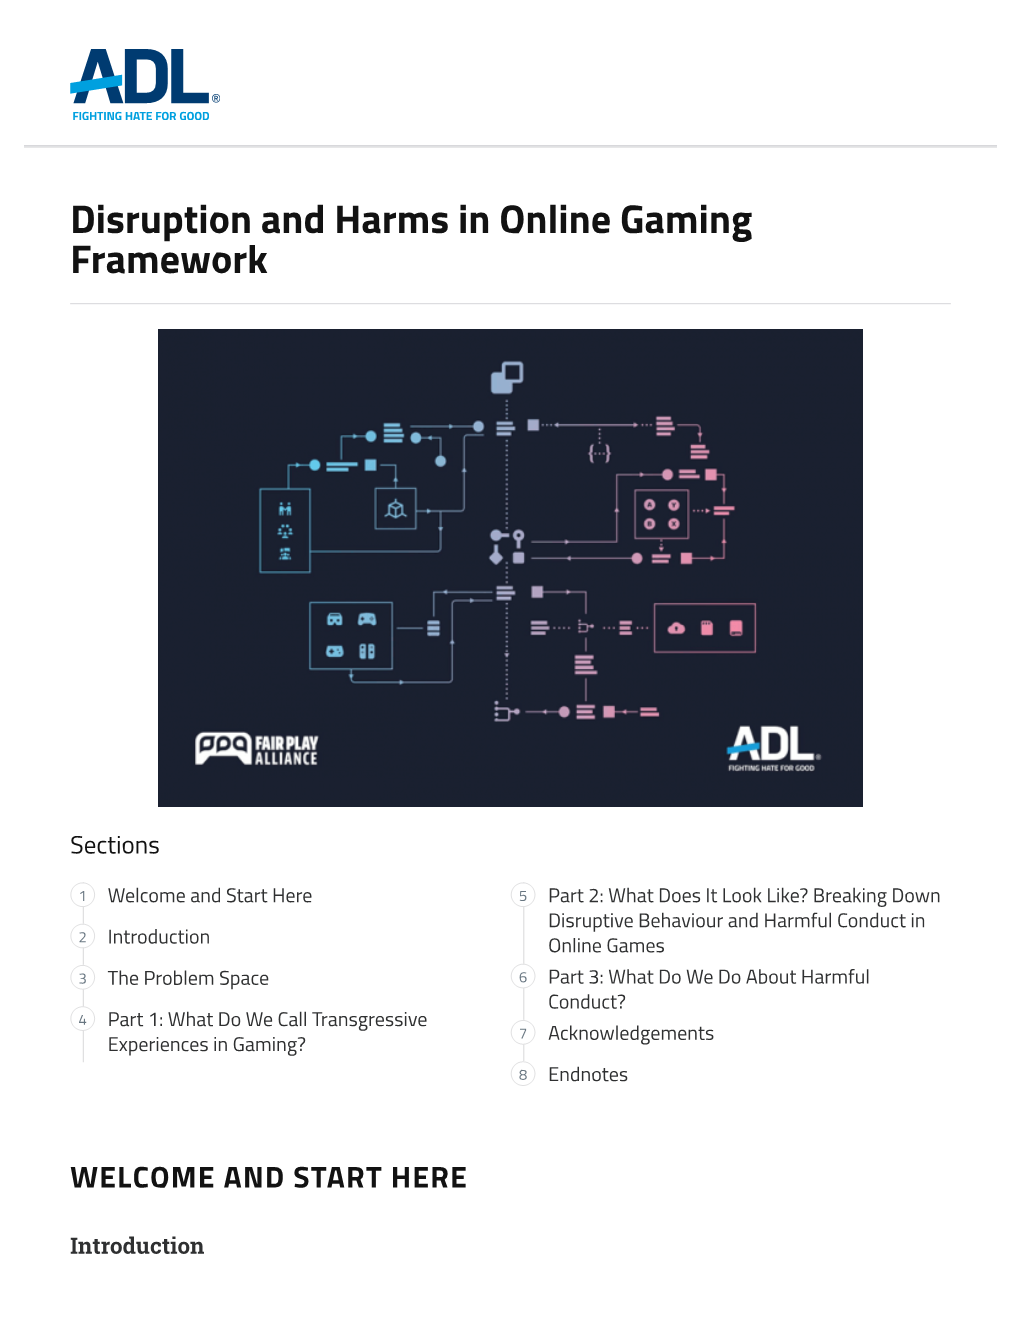 Disruption and Harms in Online Gaming Framework